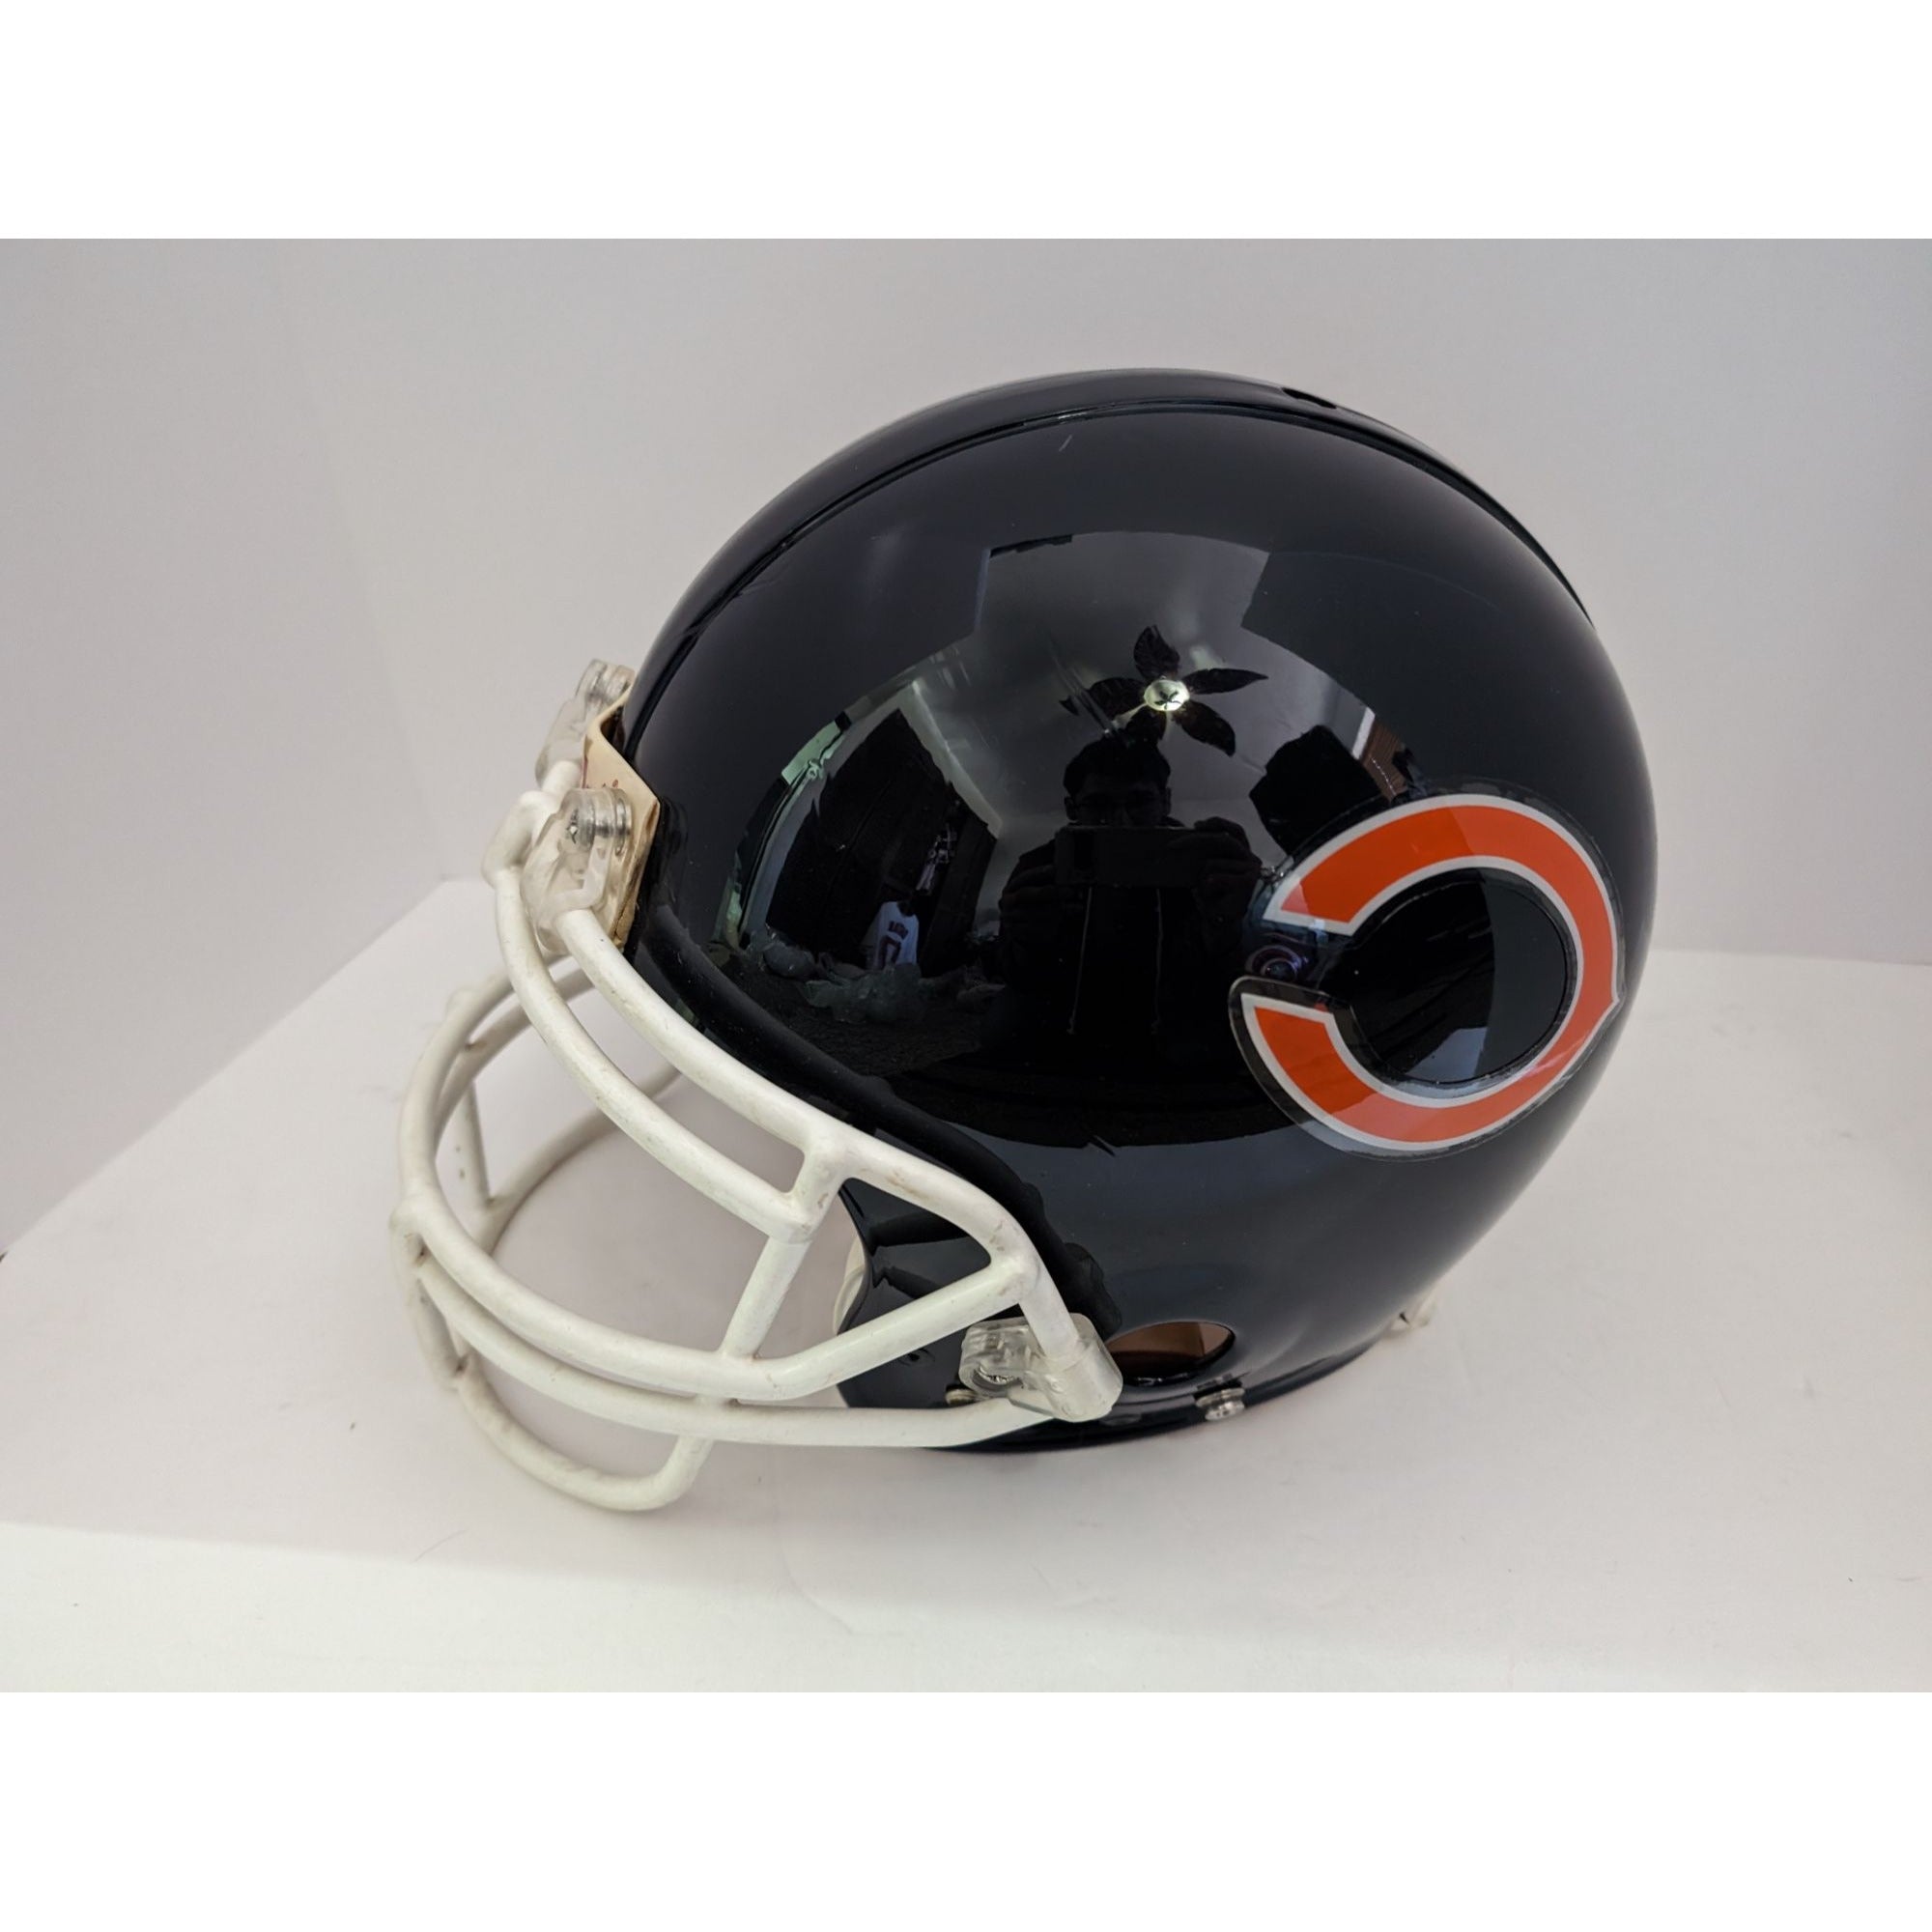 Walter Payton Chicago Bears Riddell pro model helmet signed sweetness and included his all time yards rushing One of a Kind piece